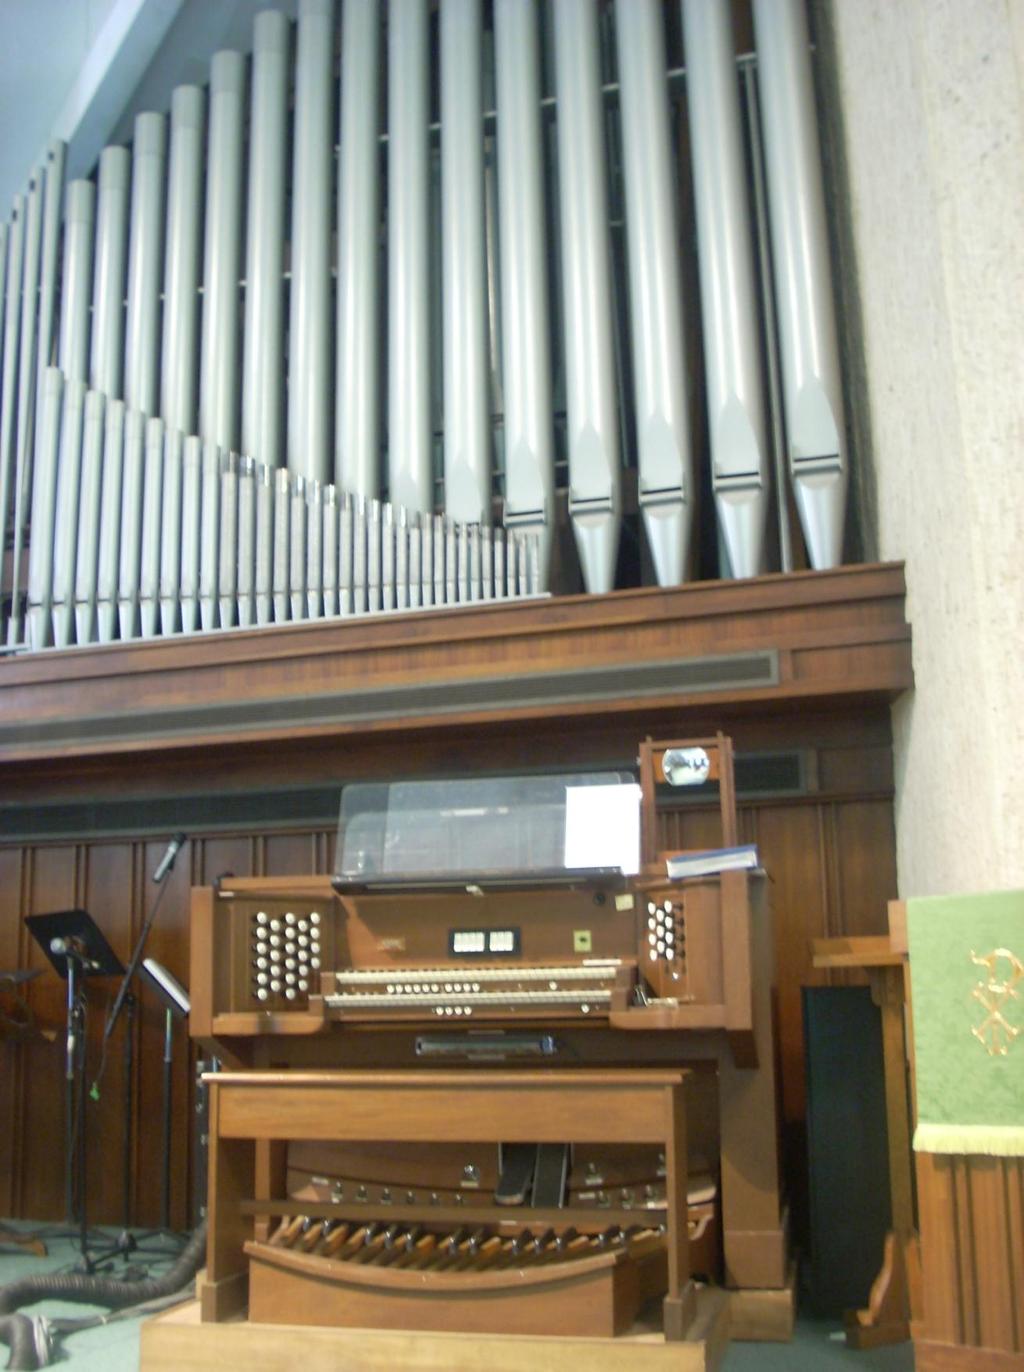 The unison pitch, the same pitch as the piano, is made by a pipe 8 feet long at the bottom of the organ keyboard.